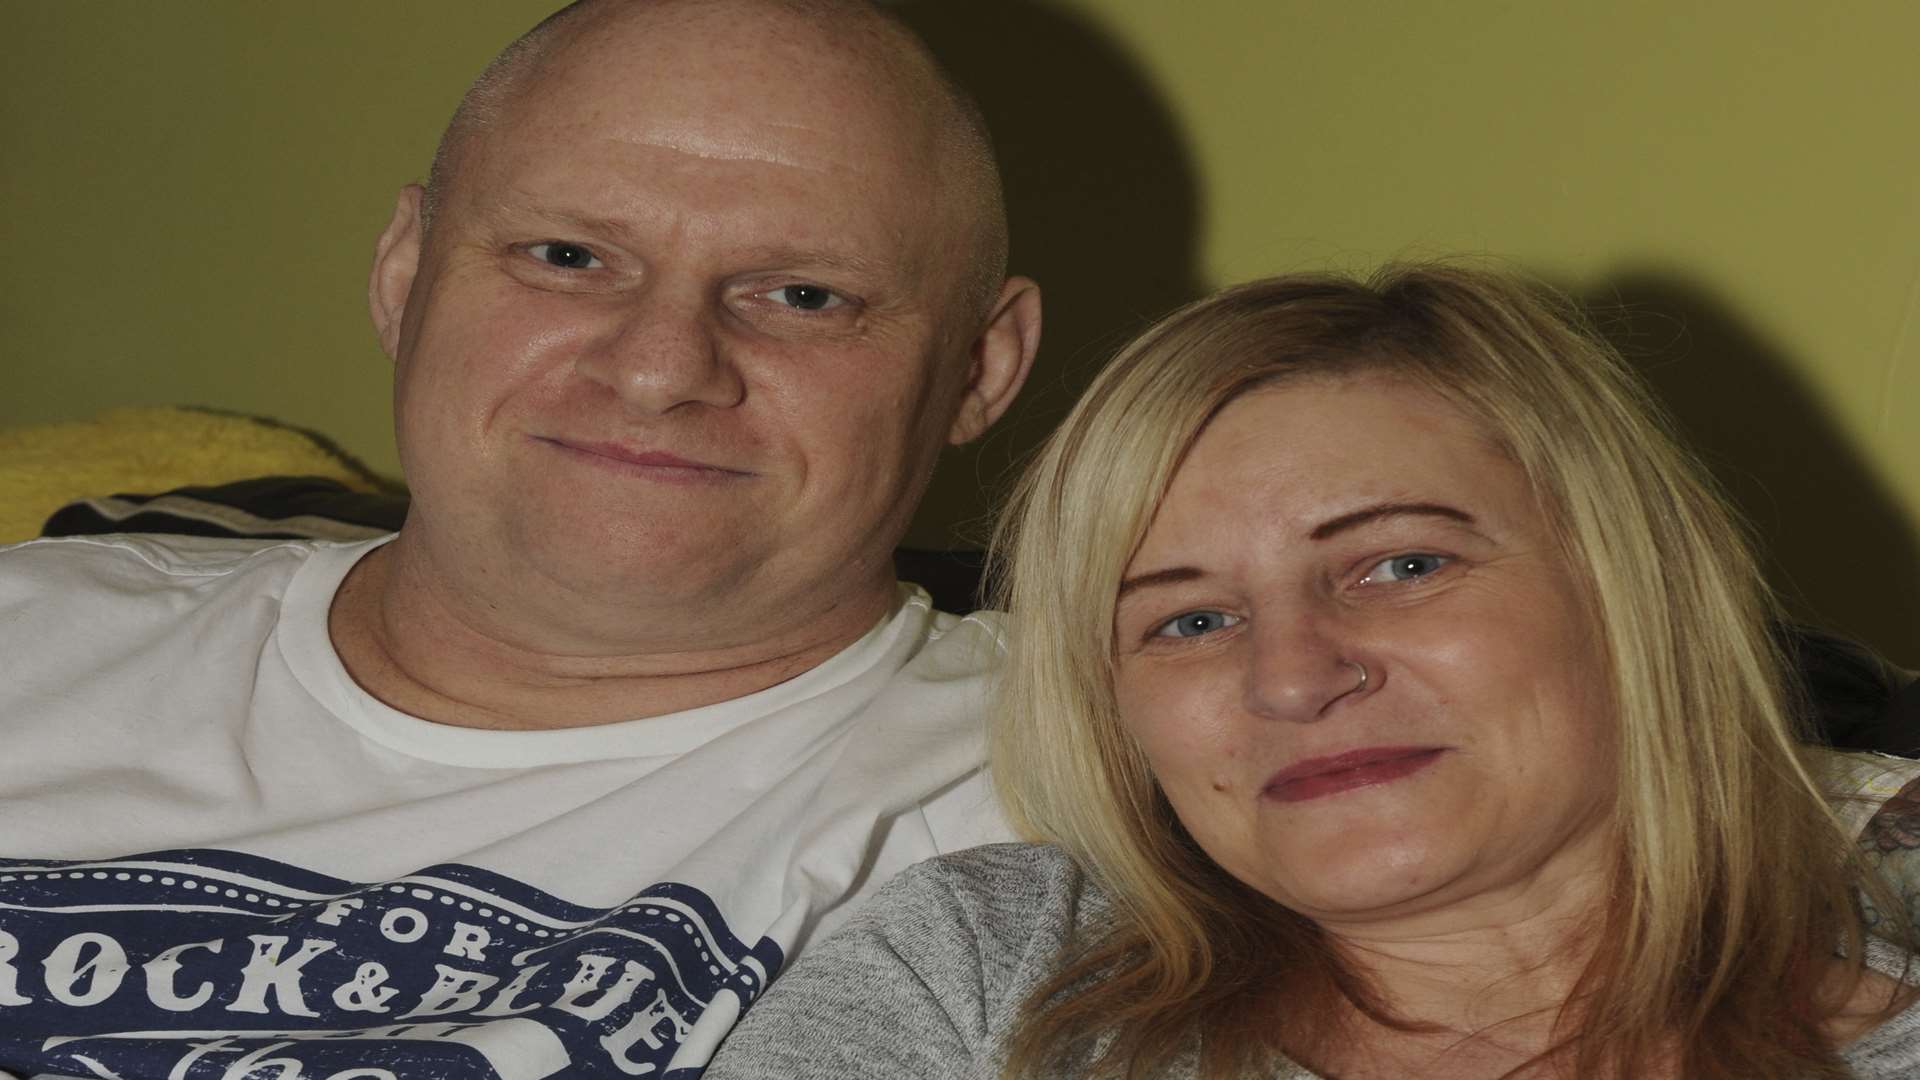 Ray Few and Sally Bester are raising funds for their wedding